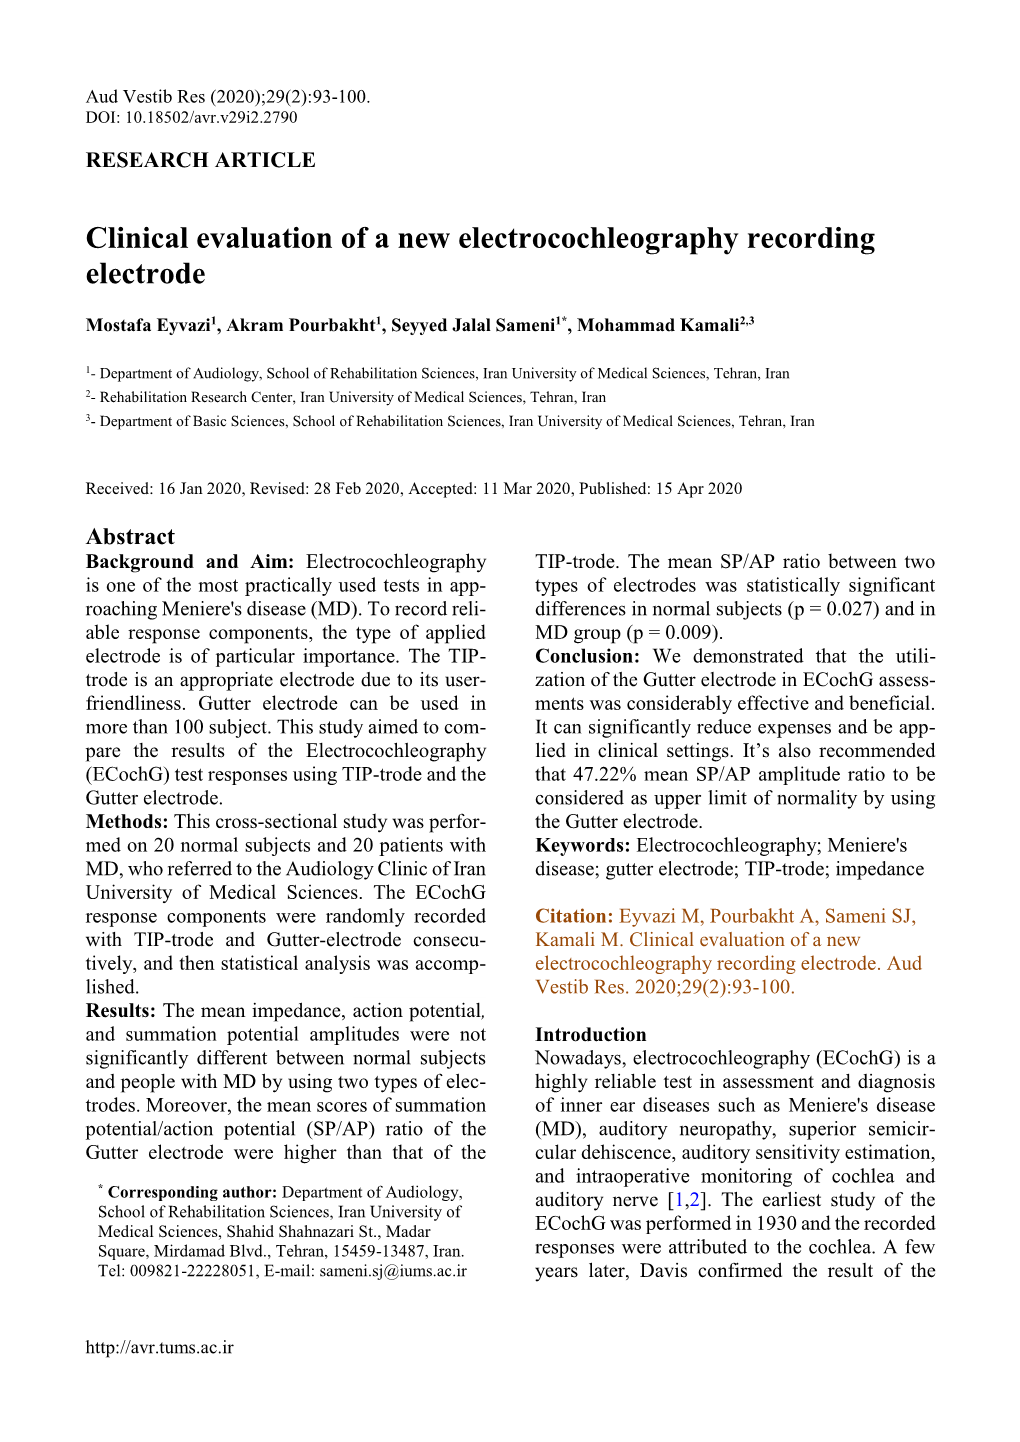 Clinical Evaluation of a New Electrocochleography Recording Electrode